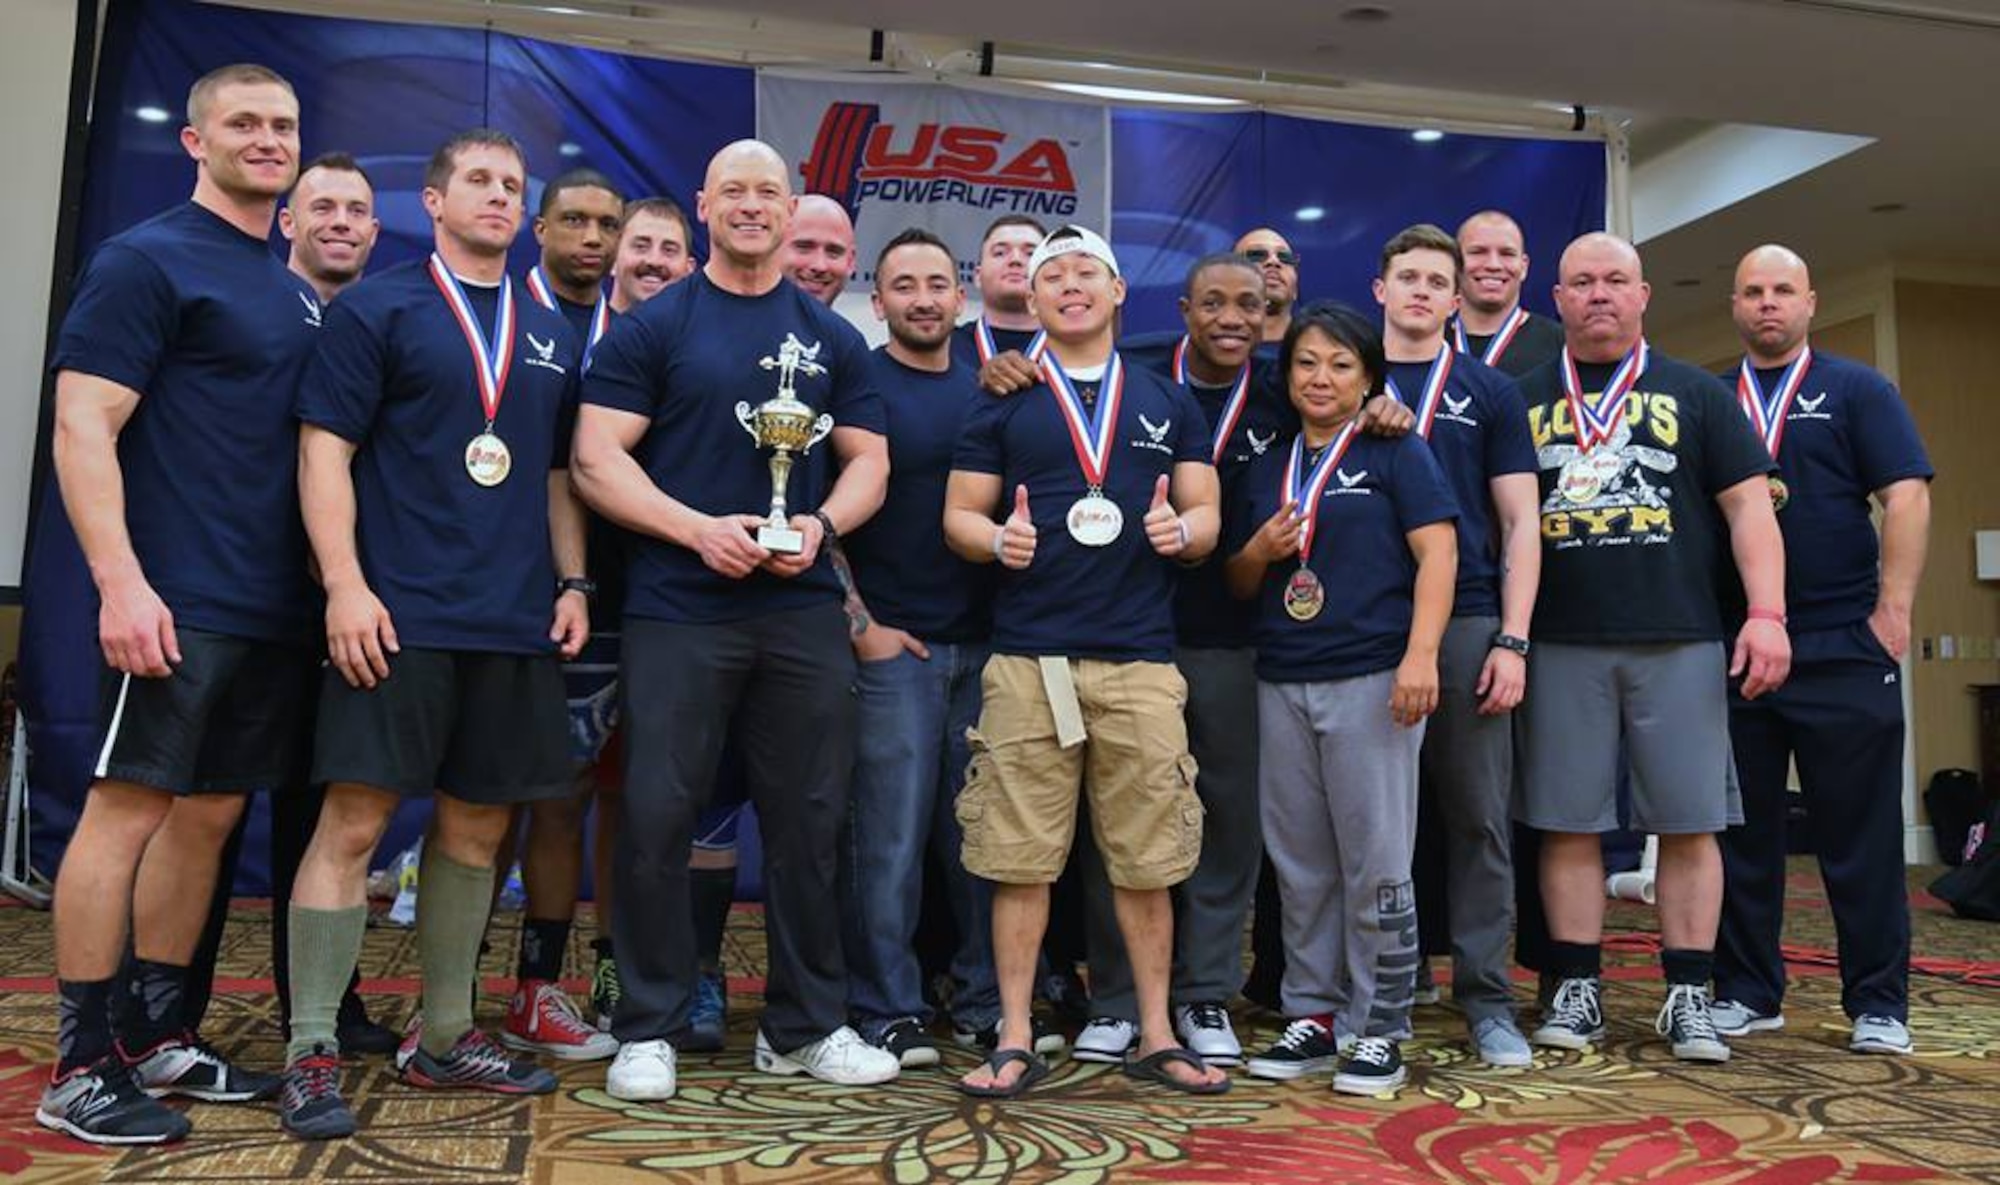 The Air Force Powerlifting Team is shown at the 2015 USAPL Military Nationals and Southeastern State Bench Competition in Atlanta March 14, 2015. Master Sgt. Michael D. Lear, 347th Recruiting Squadron, is at far left, and Tech. Sgt. Michael L. Parrott, Headquarters Air Force Recruiting Service, is fourth from left. Holding the team’s silver trophy is the coach, Chief Master Sgt. Troy Saunders, HQ Air Force, the Pentagon. (Courtesy photo)